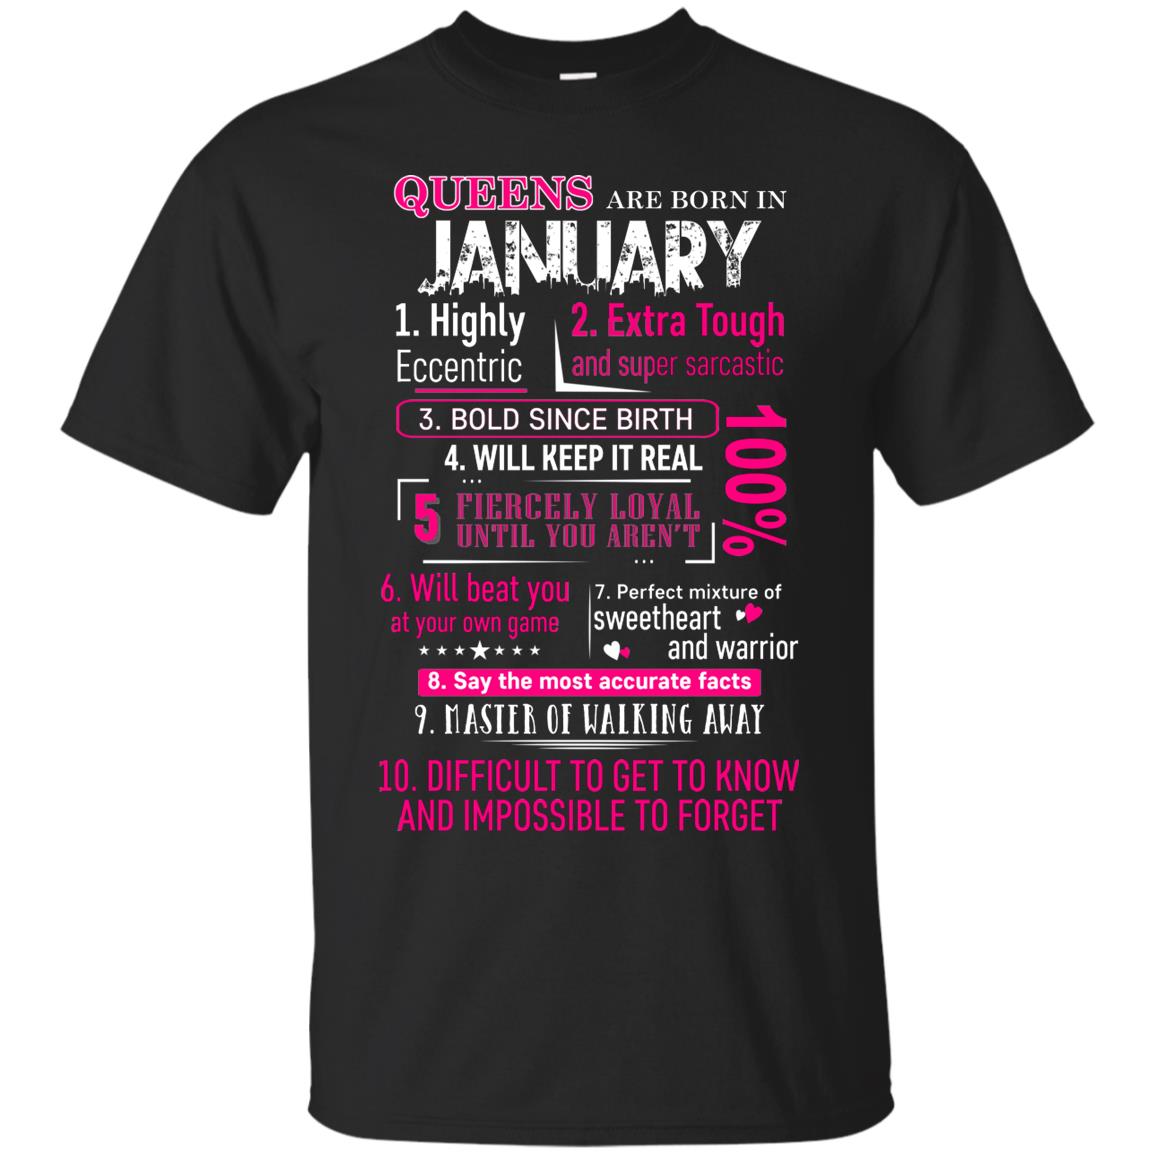 10 Reasons Queens Are Born In January shirt